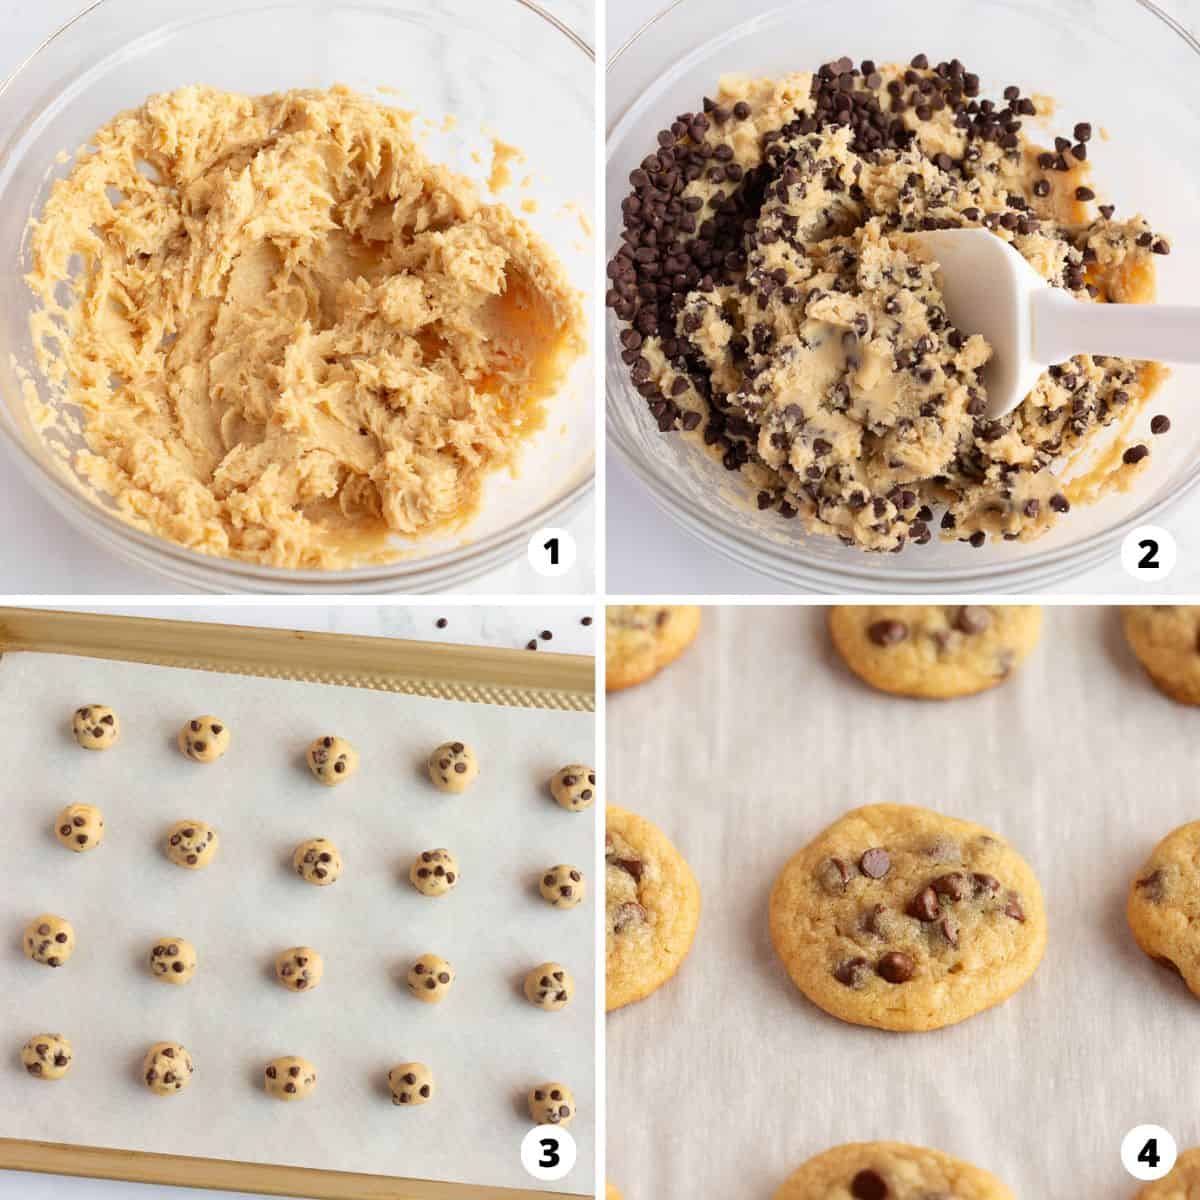 Showing how to make mini chocolate chip cookies in a 4 step collage.